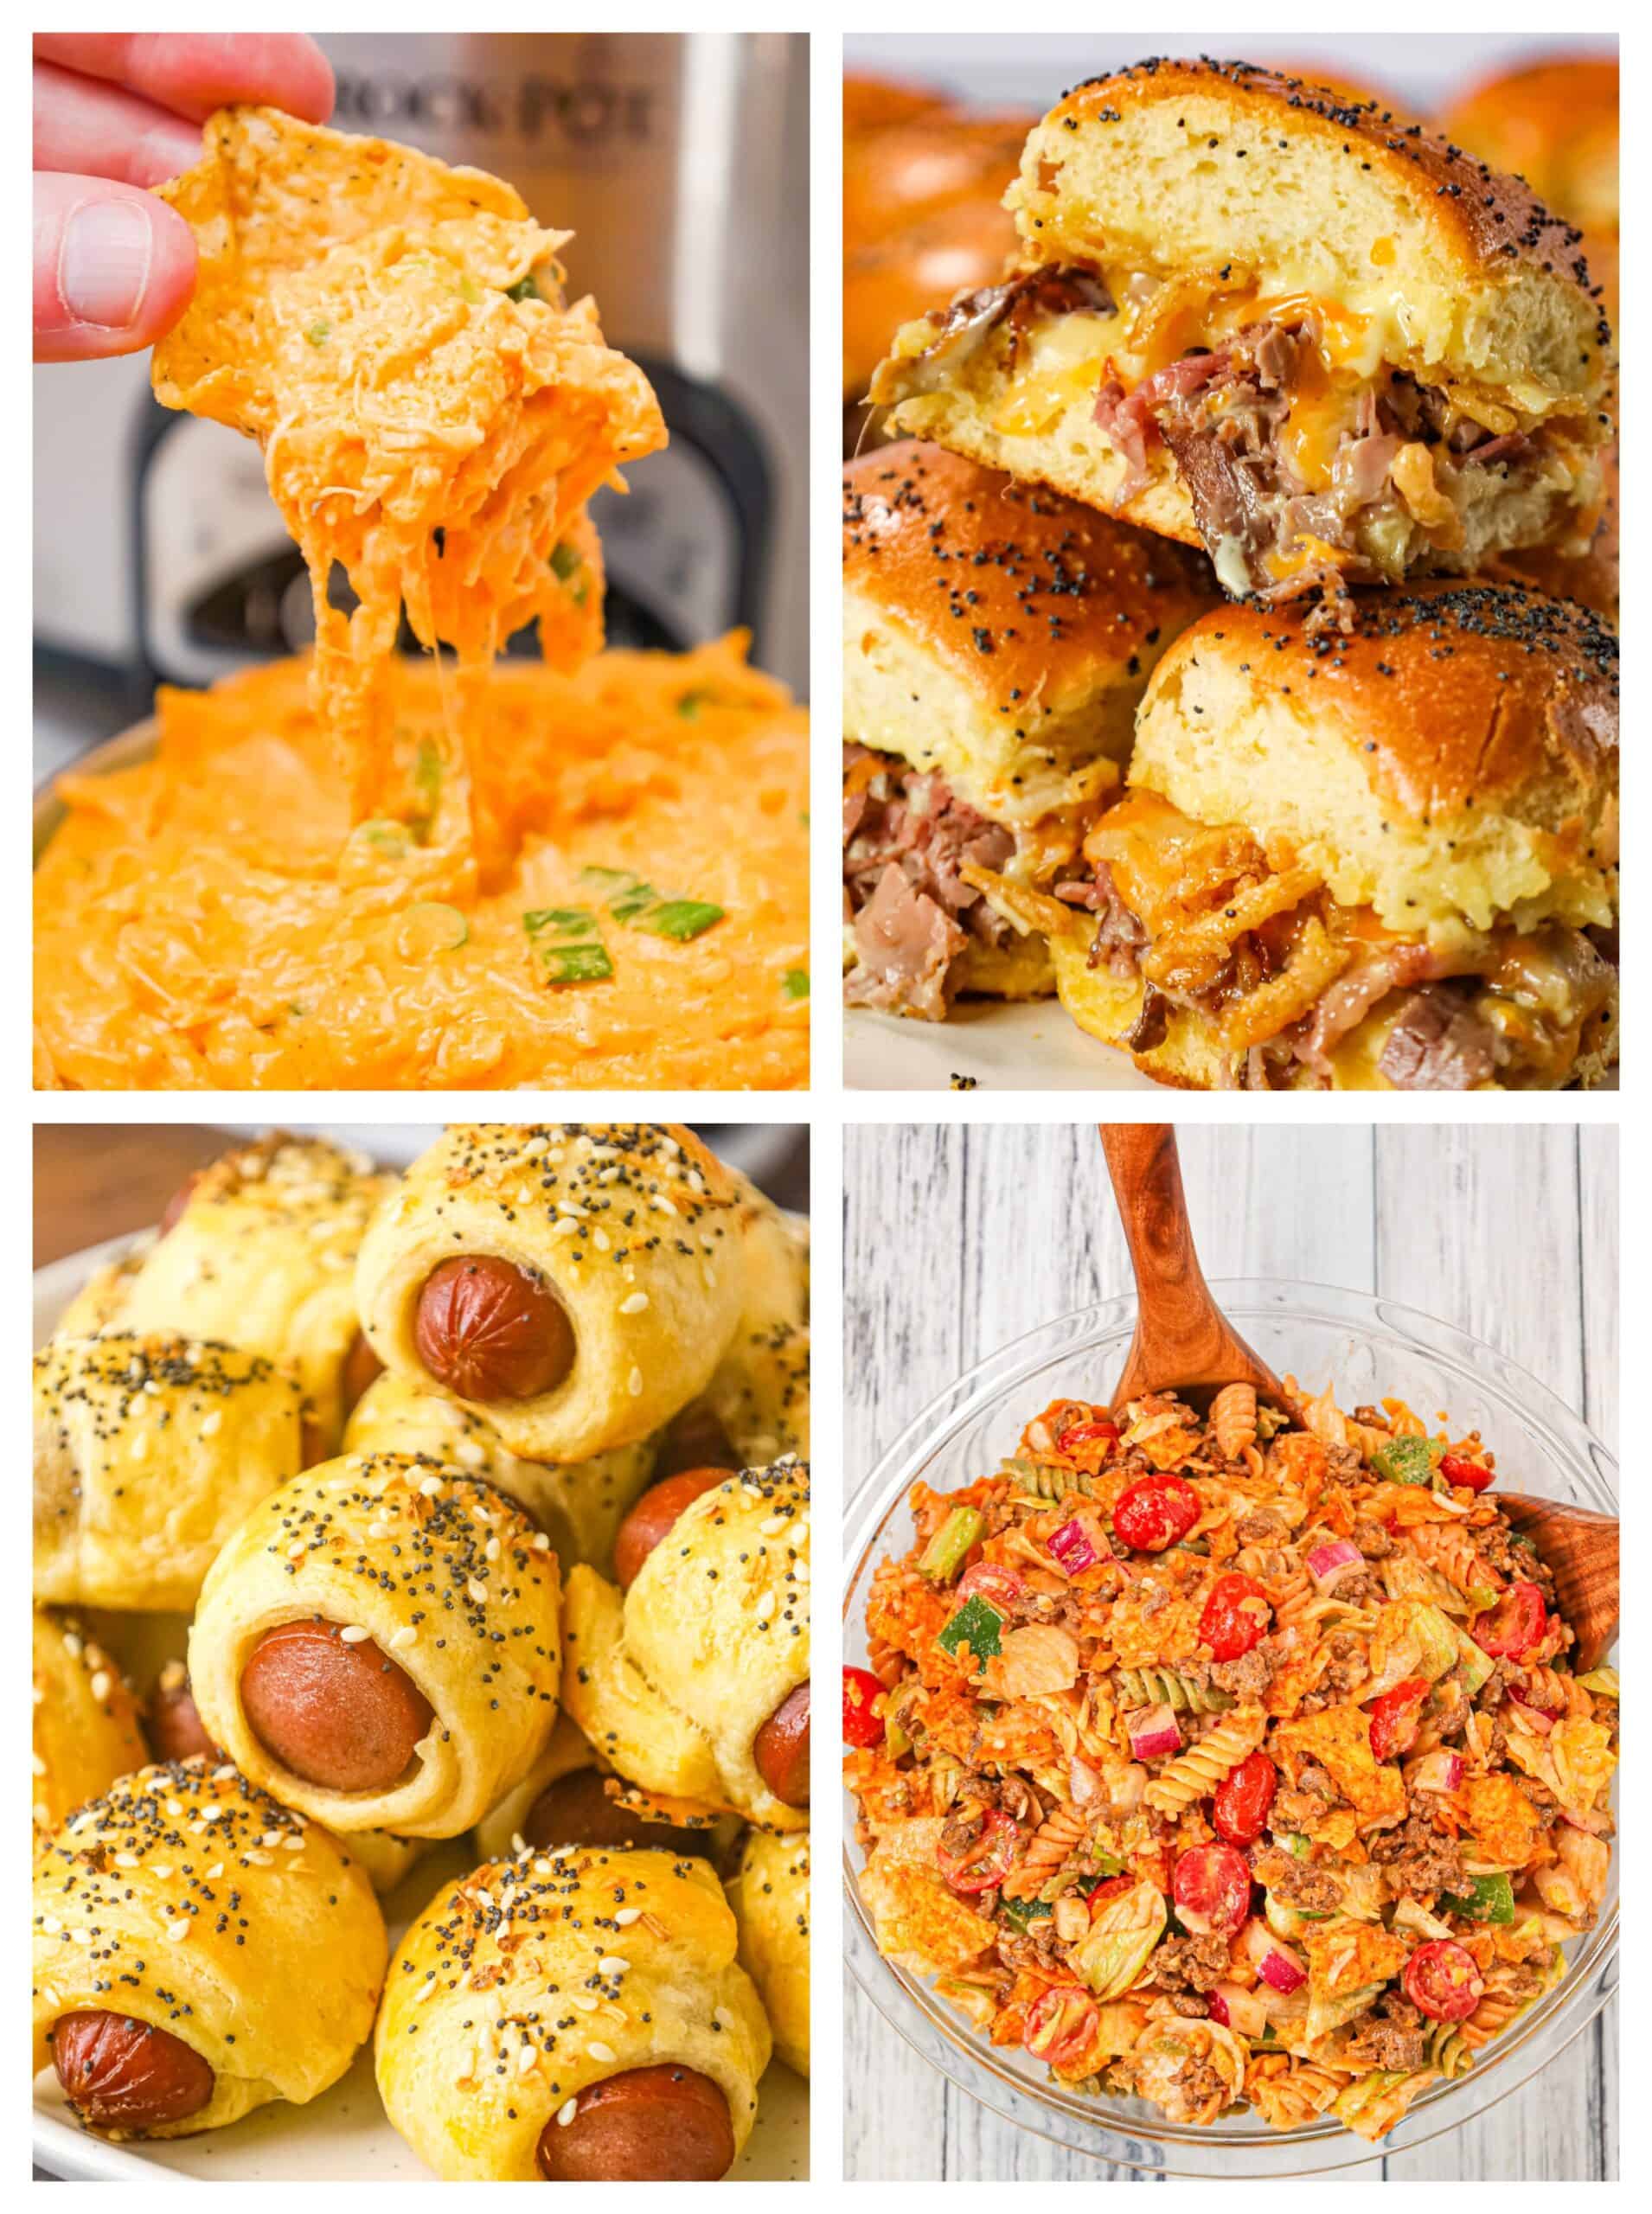 Super Bowl Party Food Recipes - THIS IS NOT DIET FOOD